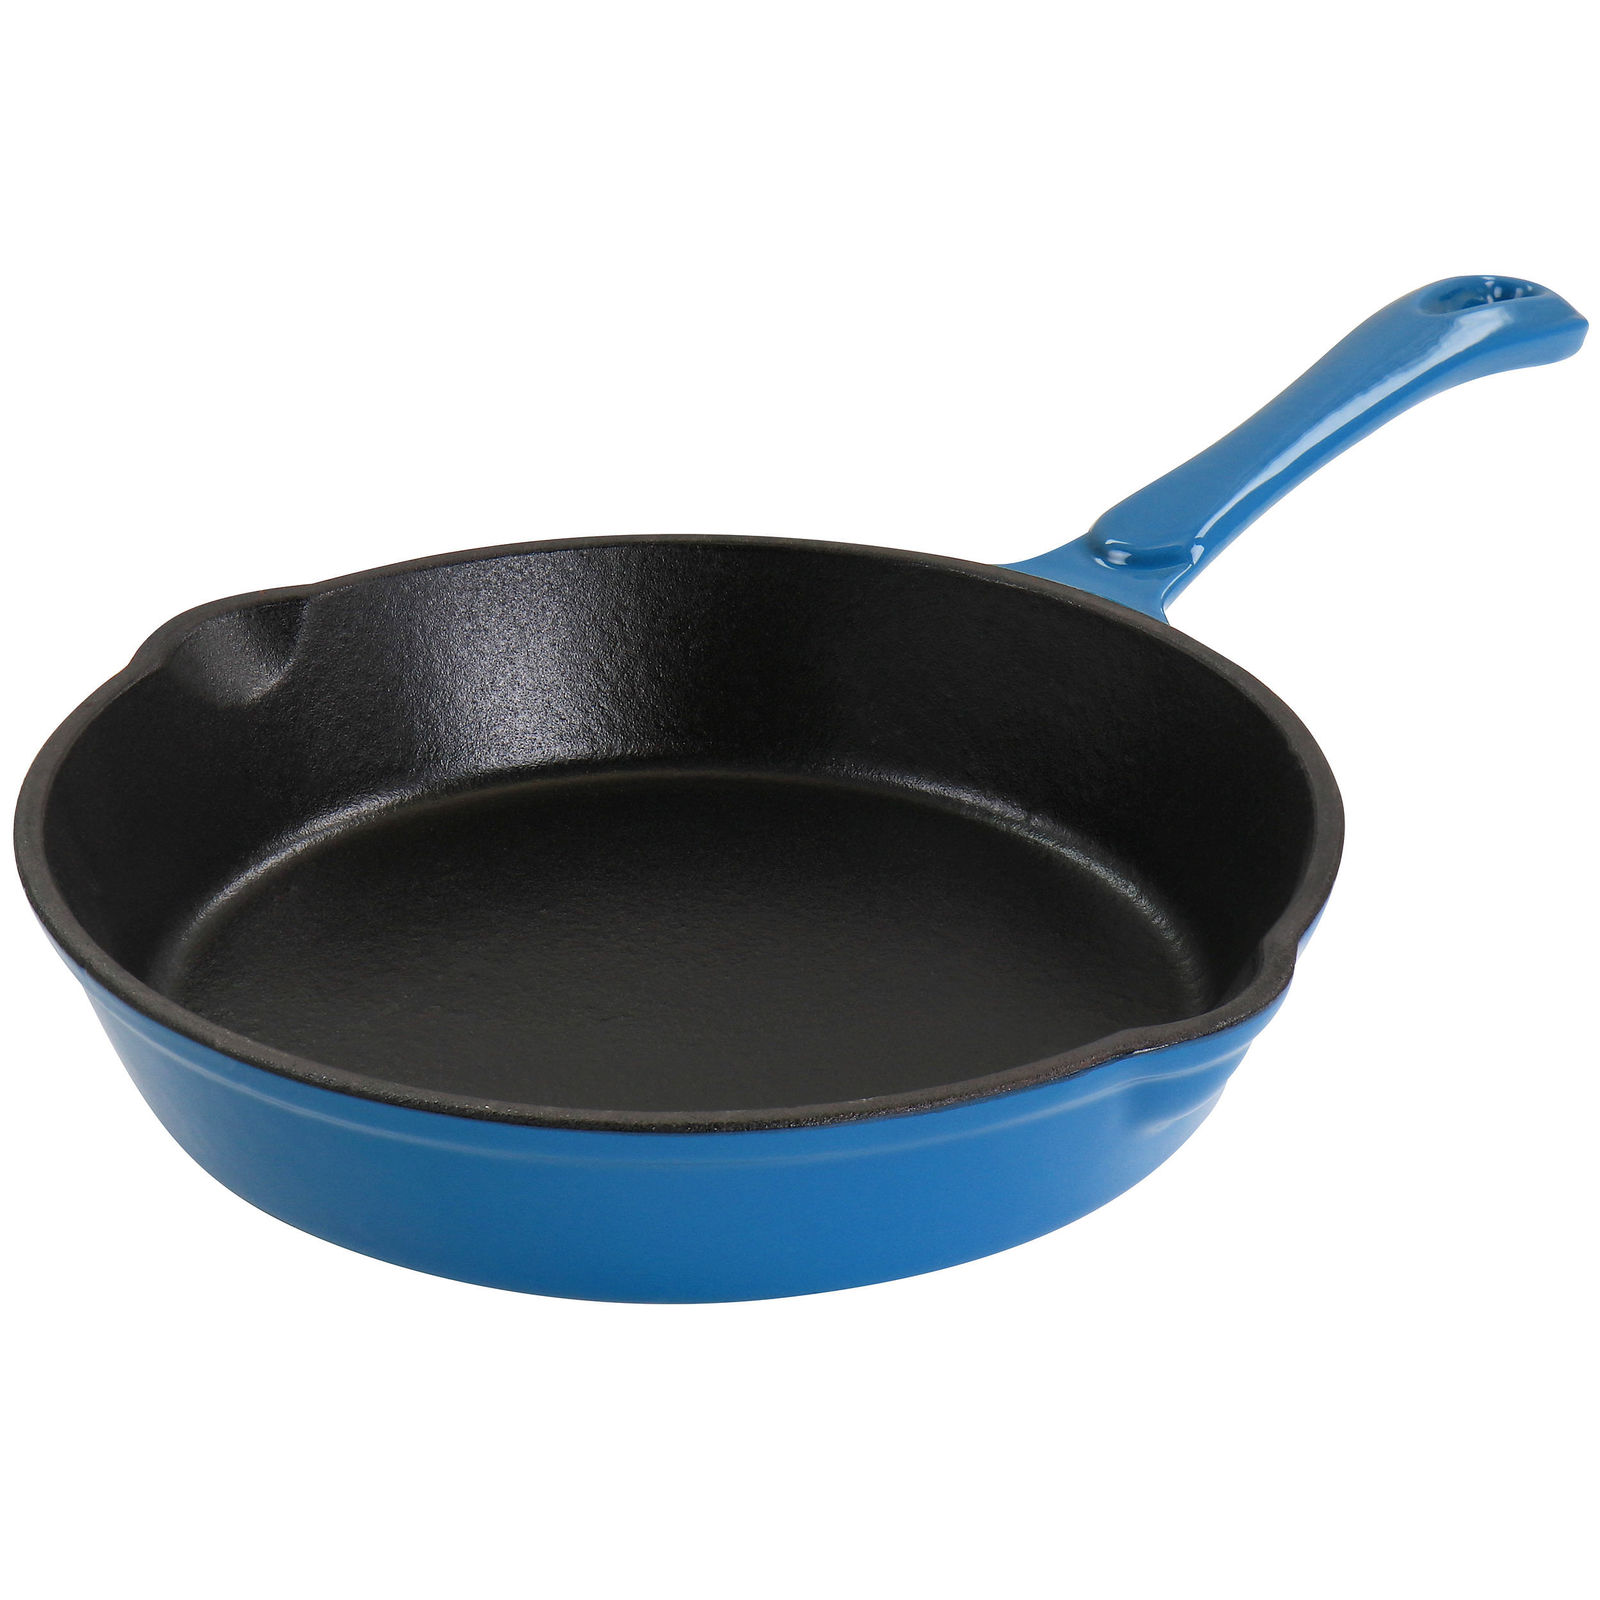 Primary image for MegaChef Enameled Round 8 Inch PreSeasoned Cast Iron Frying Pan in Turquoise